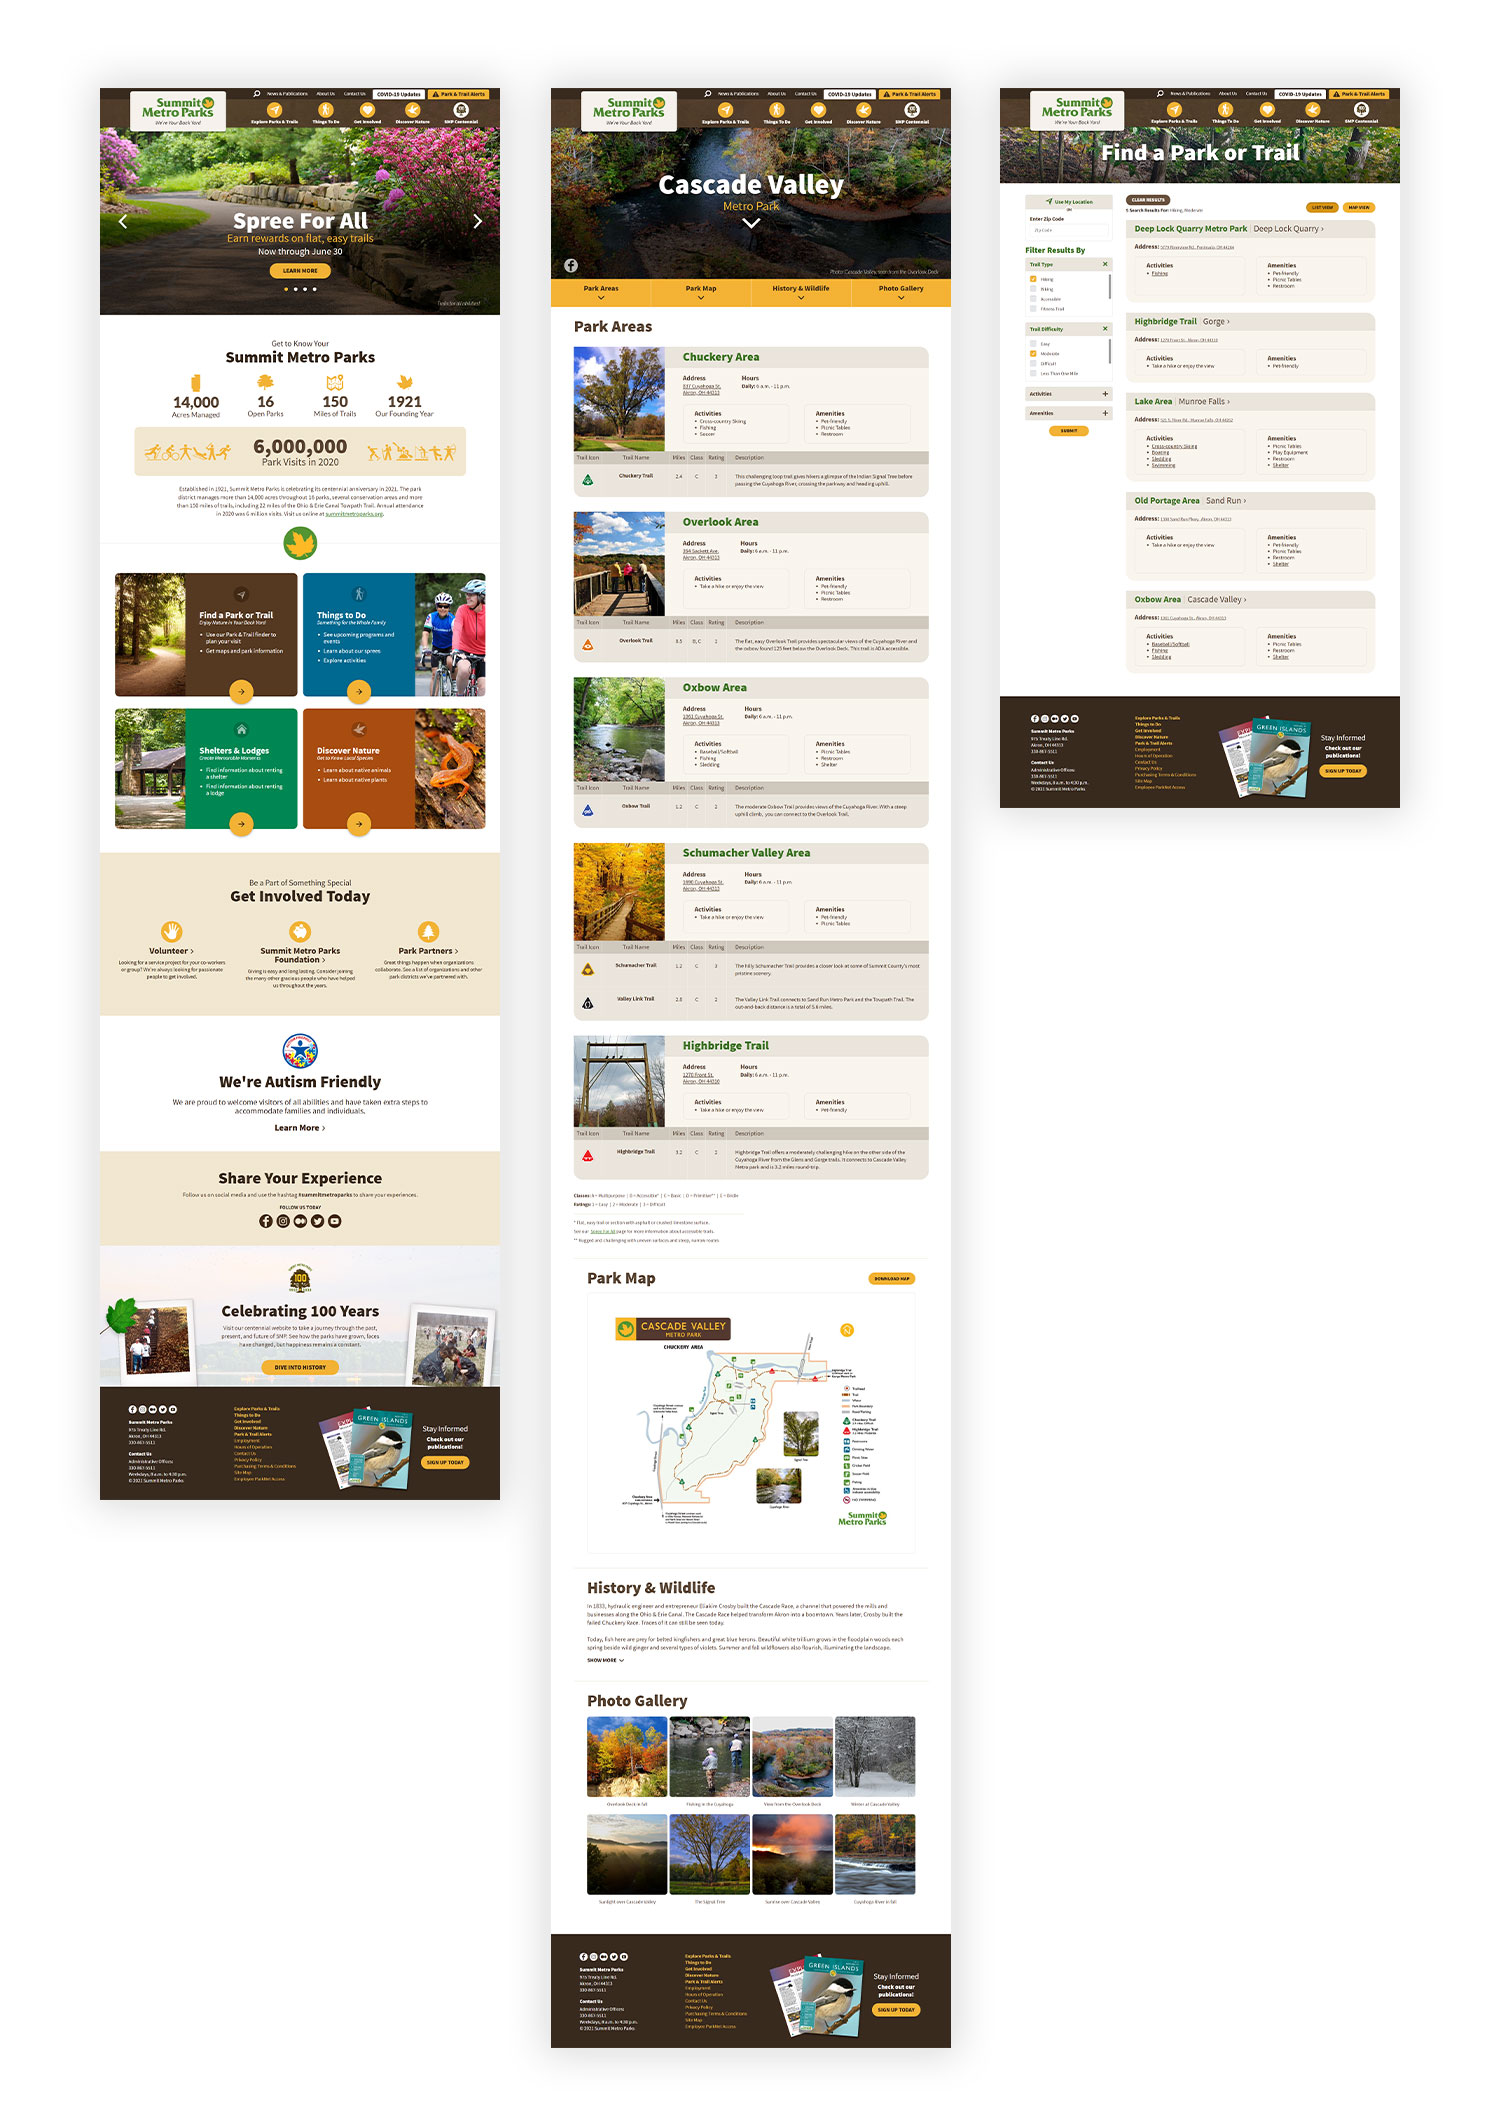 Summit Metro parks website example images